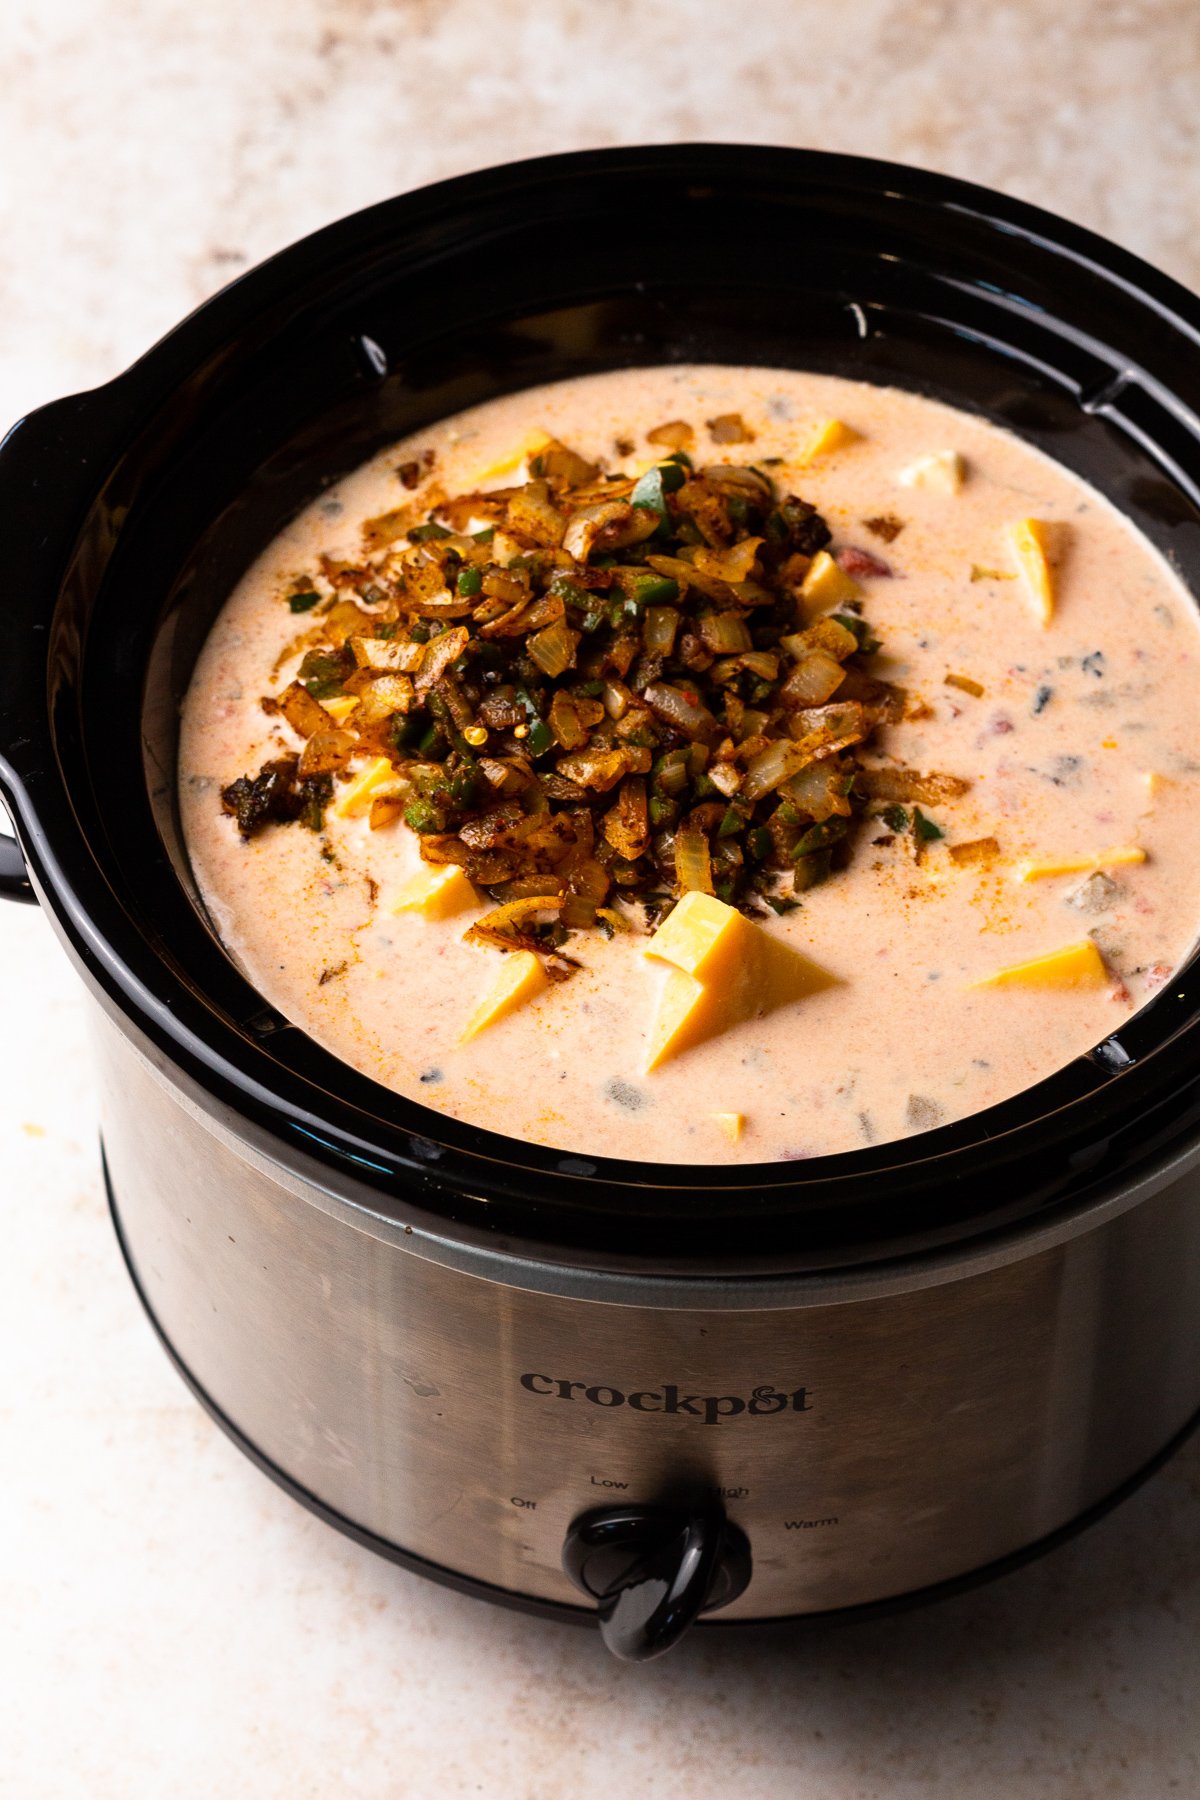 https://www.thecookierookie.com/wp-content/uploads/2019/12/how-to-crockpot-queso-recipe-3.jpg